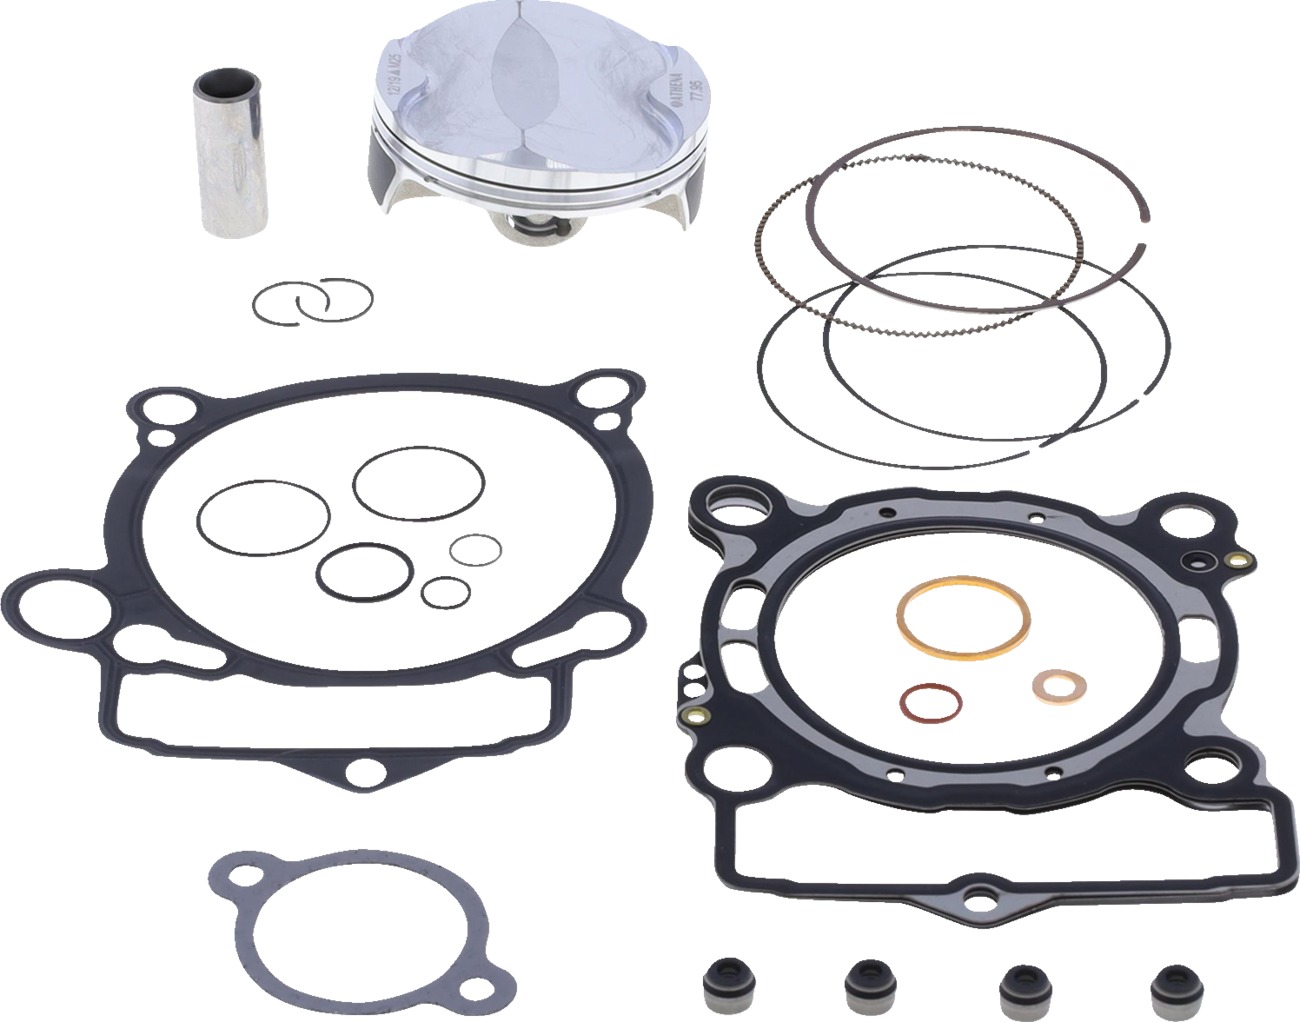 Piston & Top End Gasket Kit 'A' - For 20-22 Husqvarna KTM 250 4T - Click Image to Close